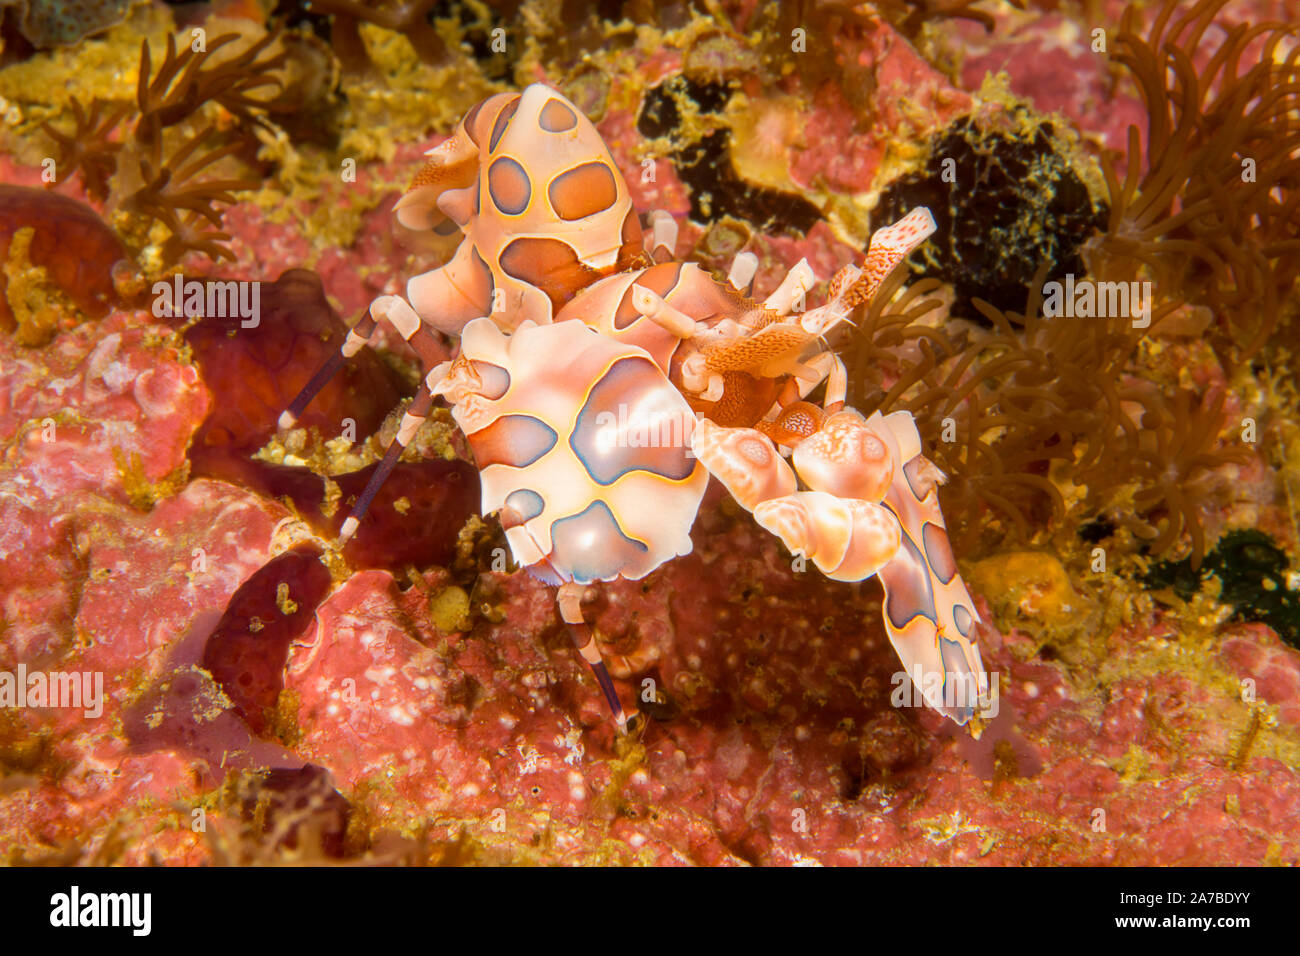 The blue harlequin shrimp, Hymenocera elegans, is also know as a clown shrimp, Philippines. Stock Photo